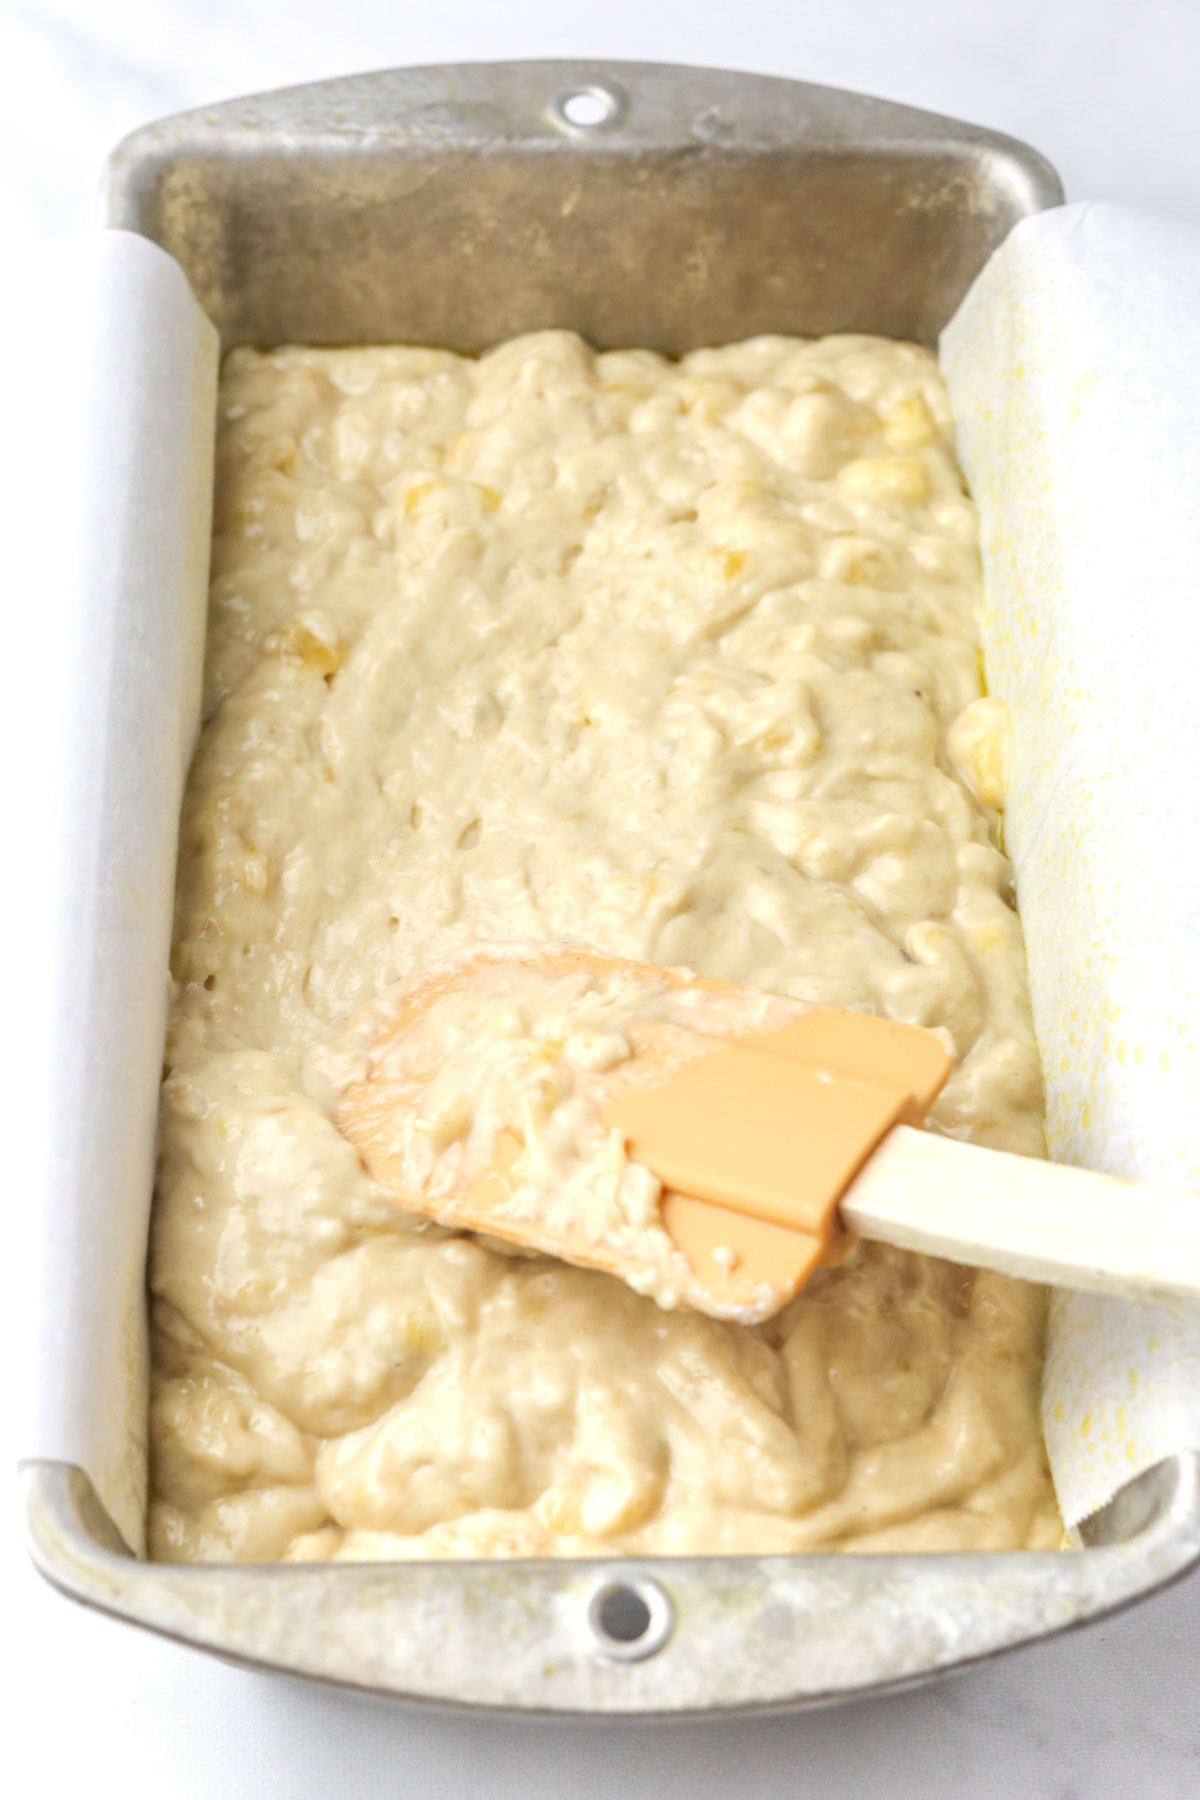 Smoothing the batter into the loaf pan evenly with a rubber spatula.